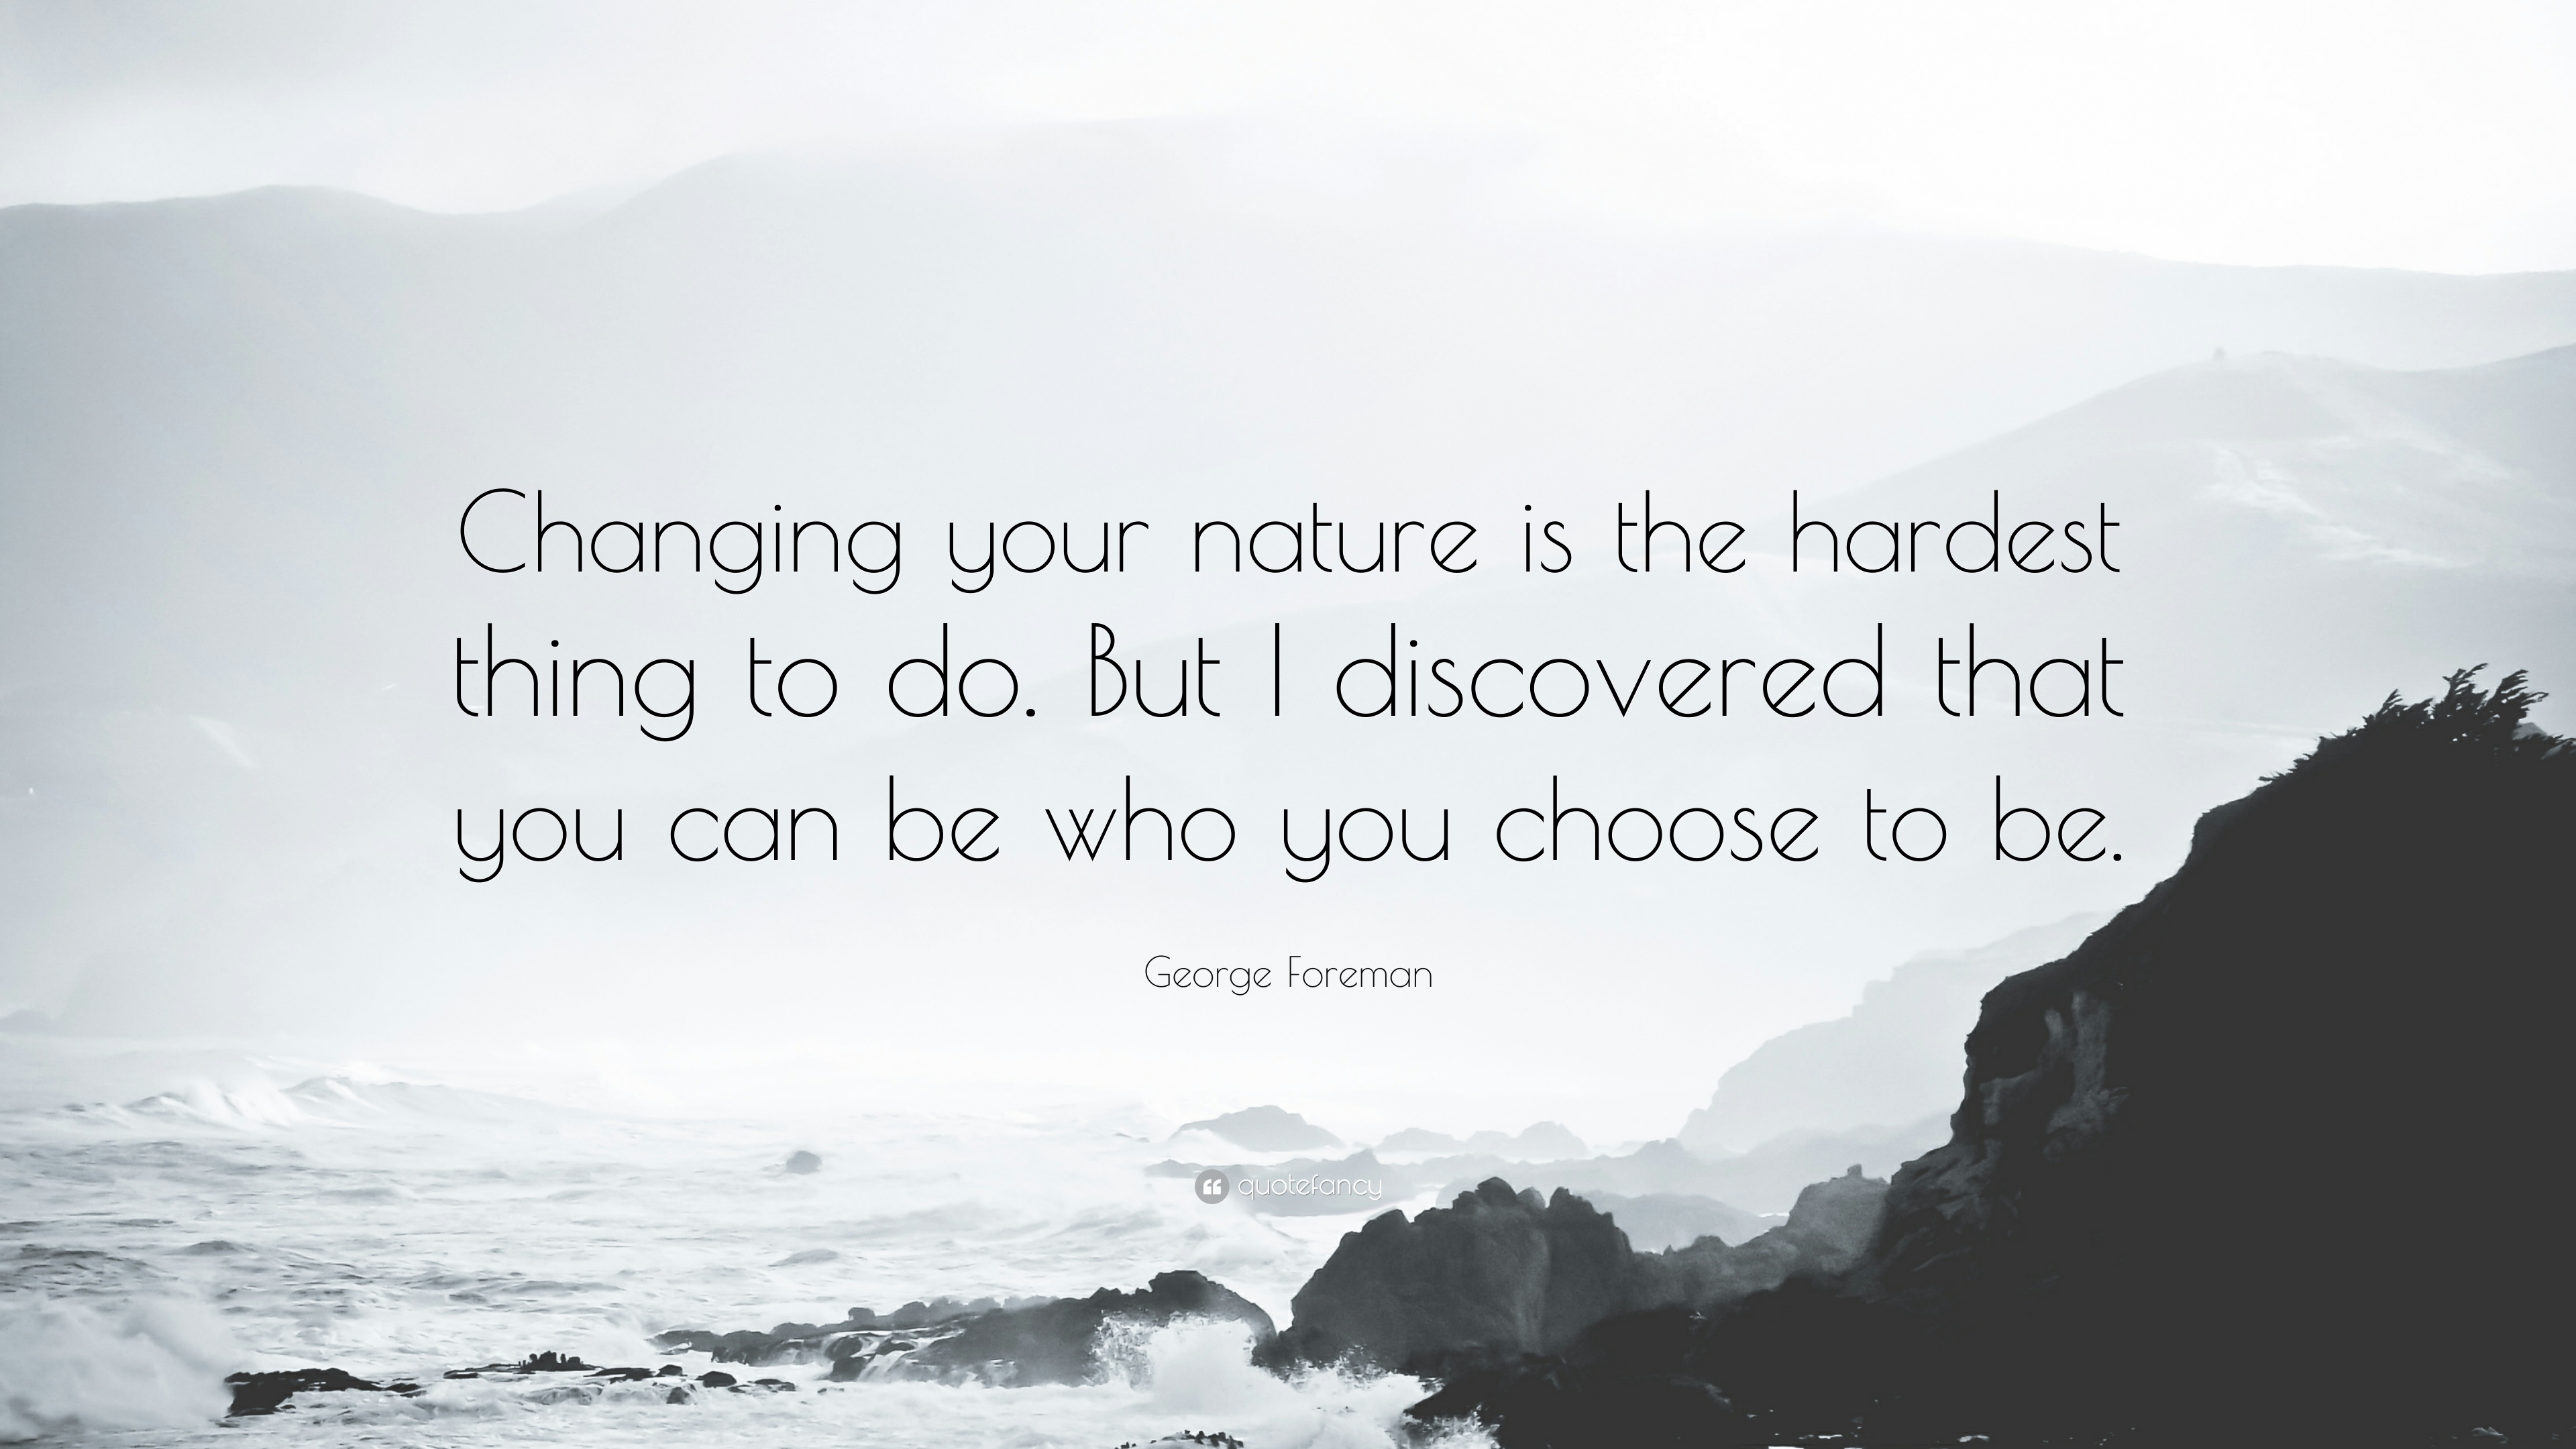 George Foreman Quote: “Changing your nature is the hardest